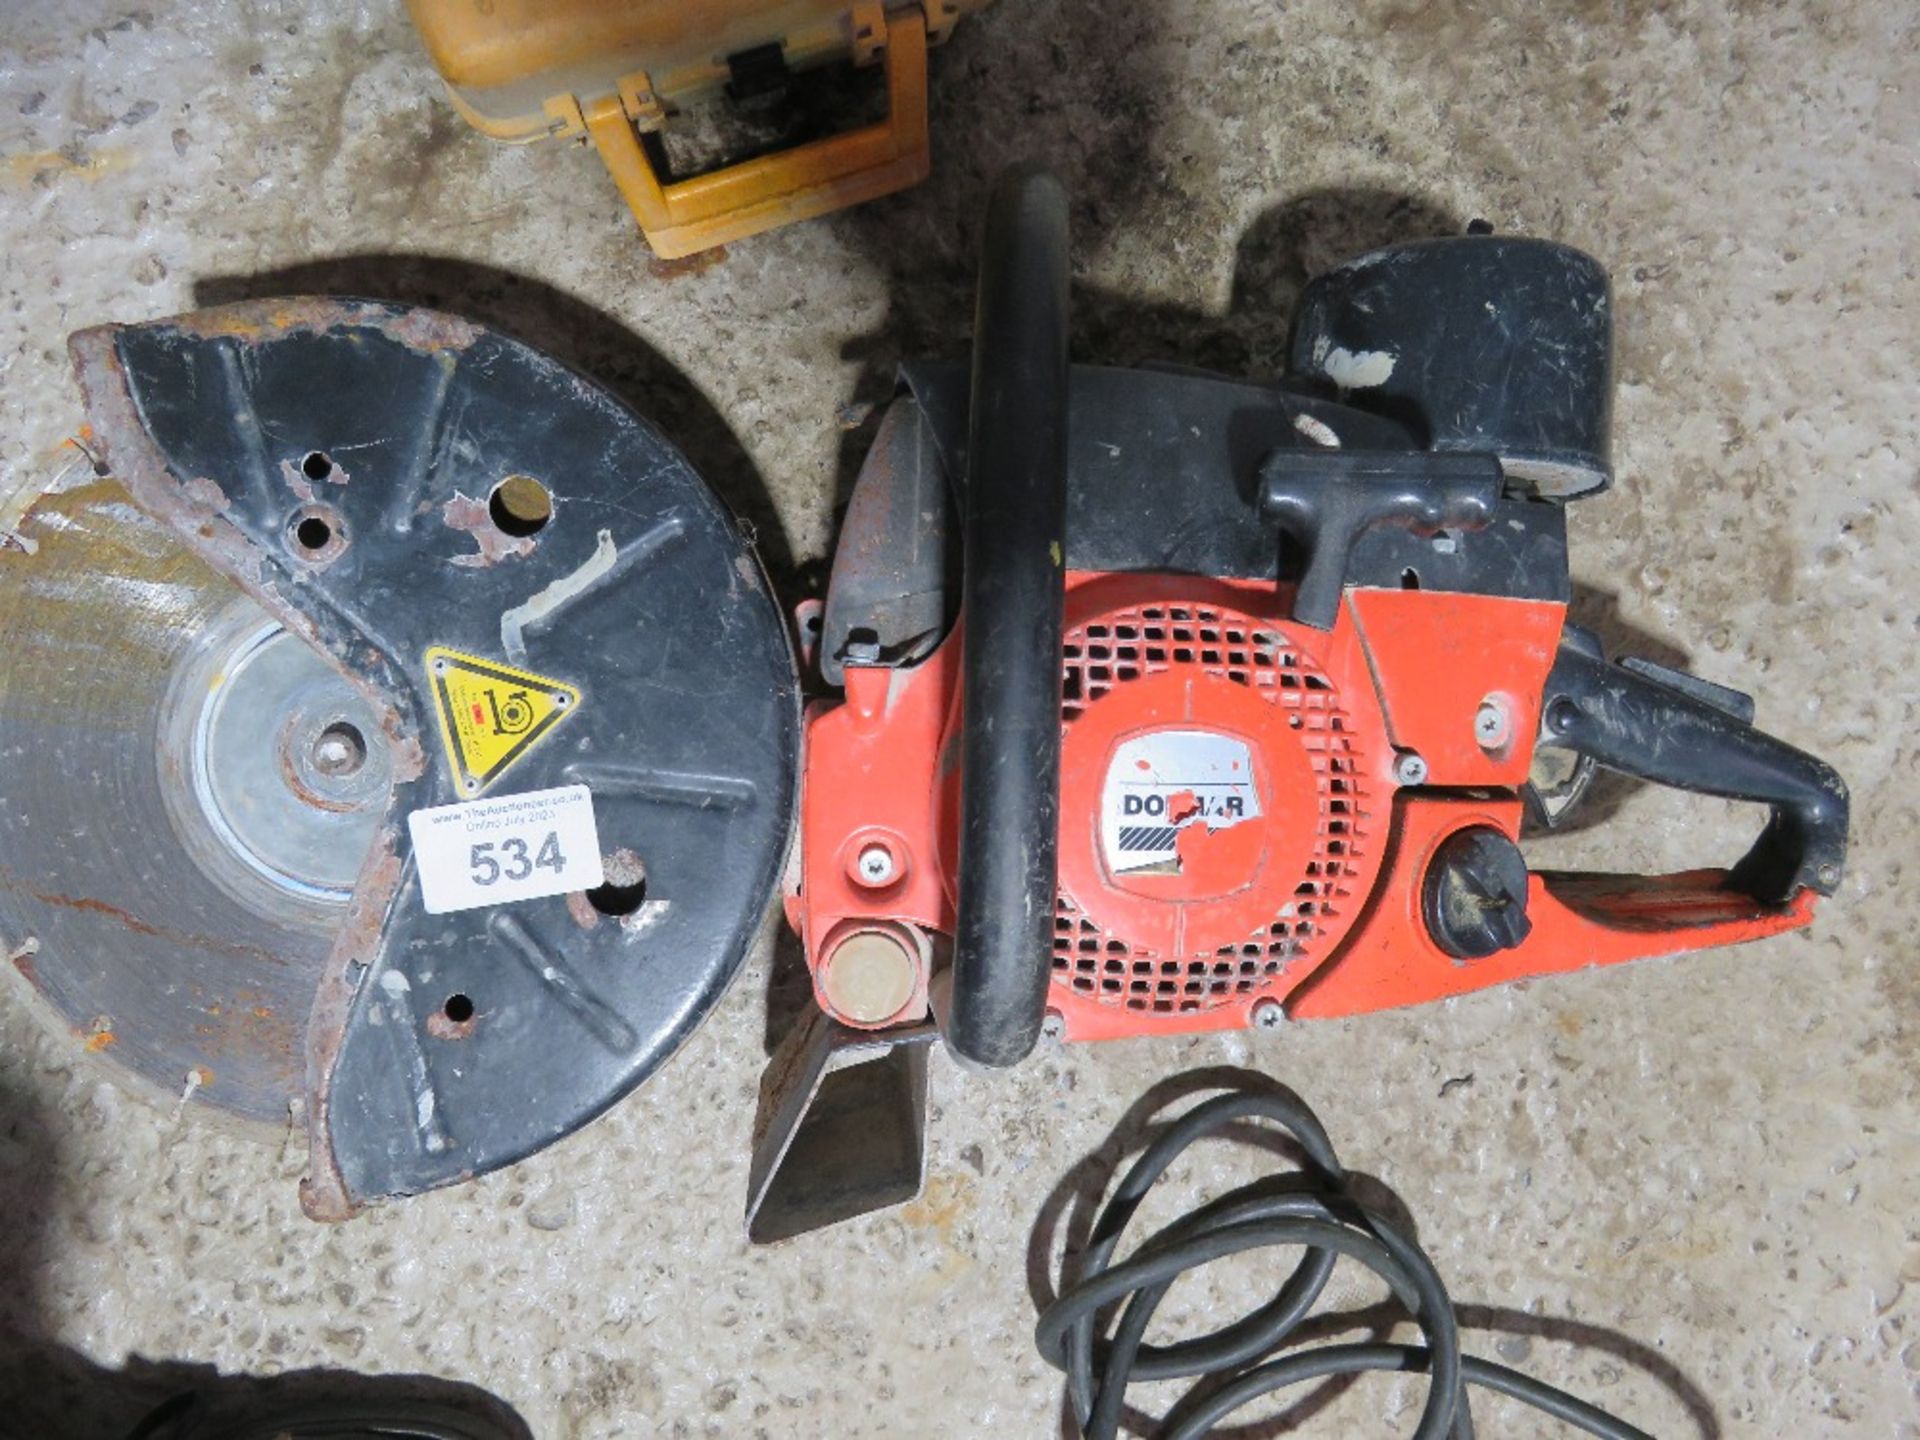 DOLMAR PETROL SAW WITH A BLADE. THIS LOT IS SOLD UNDER THE AUCTIONEERS MARGIN SCHEME, THEREFORE N